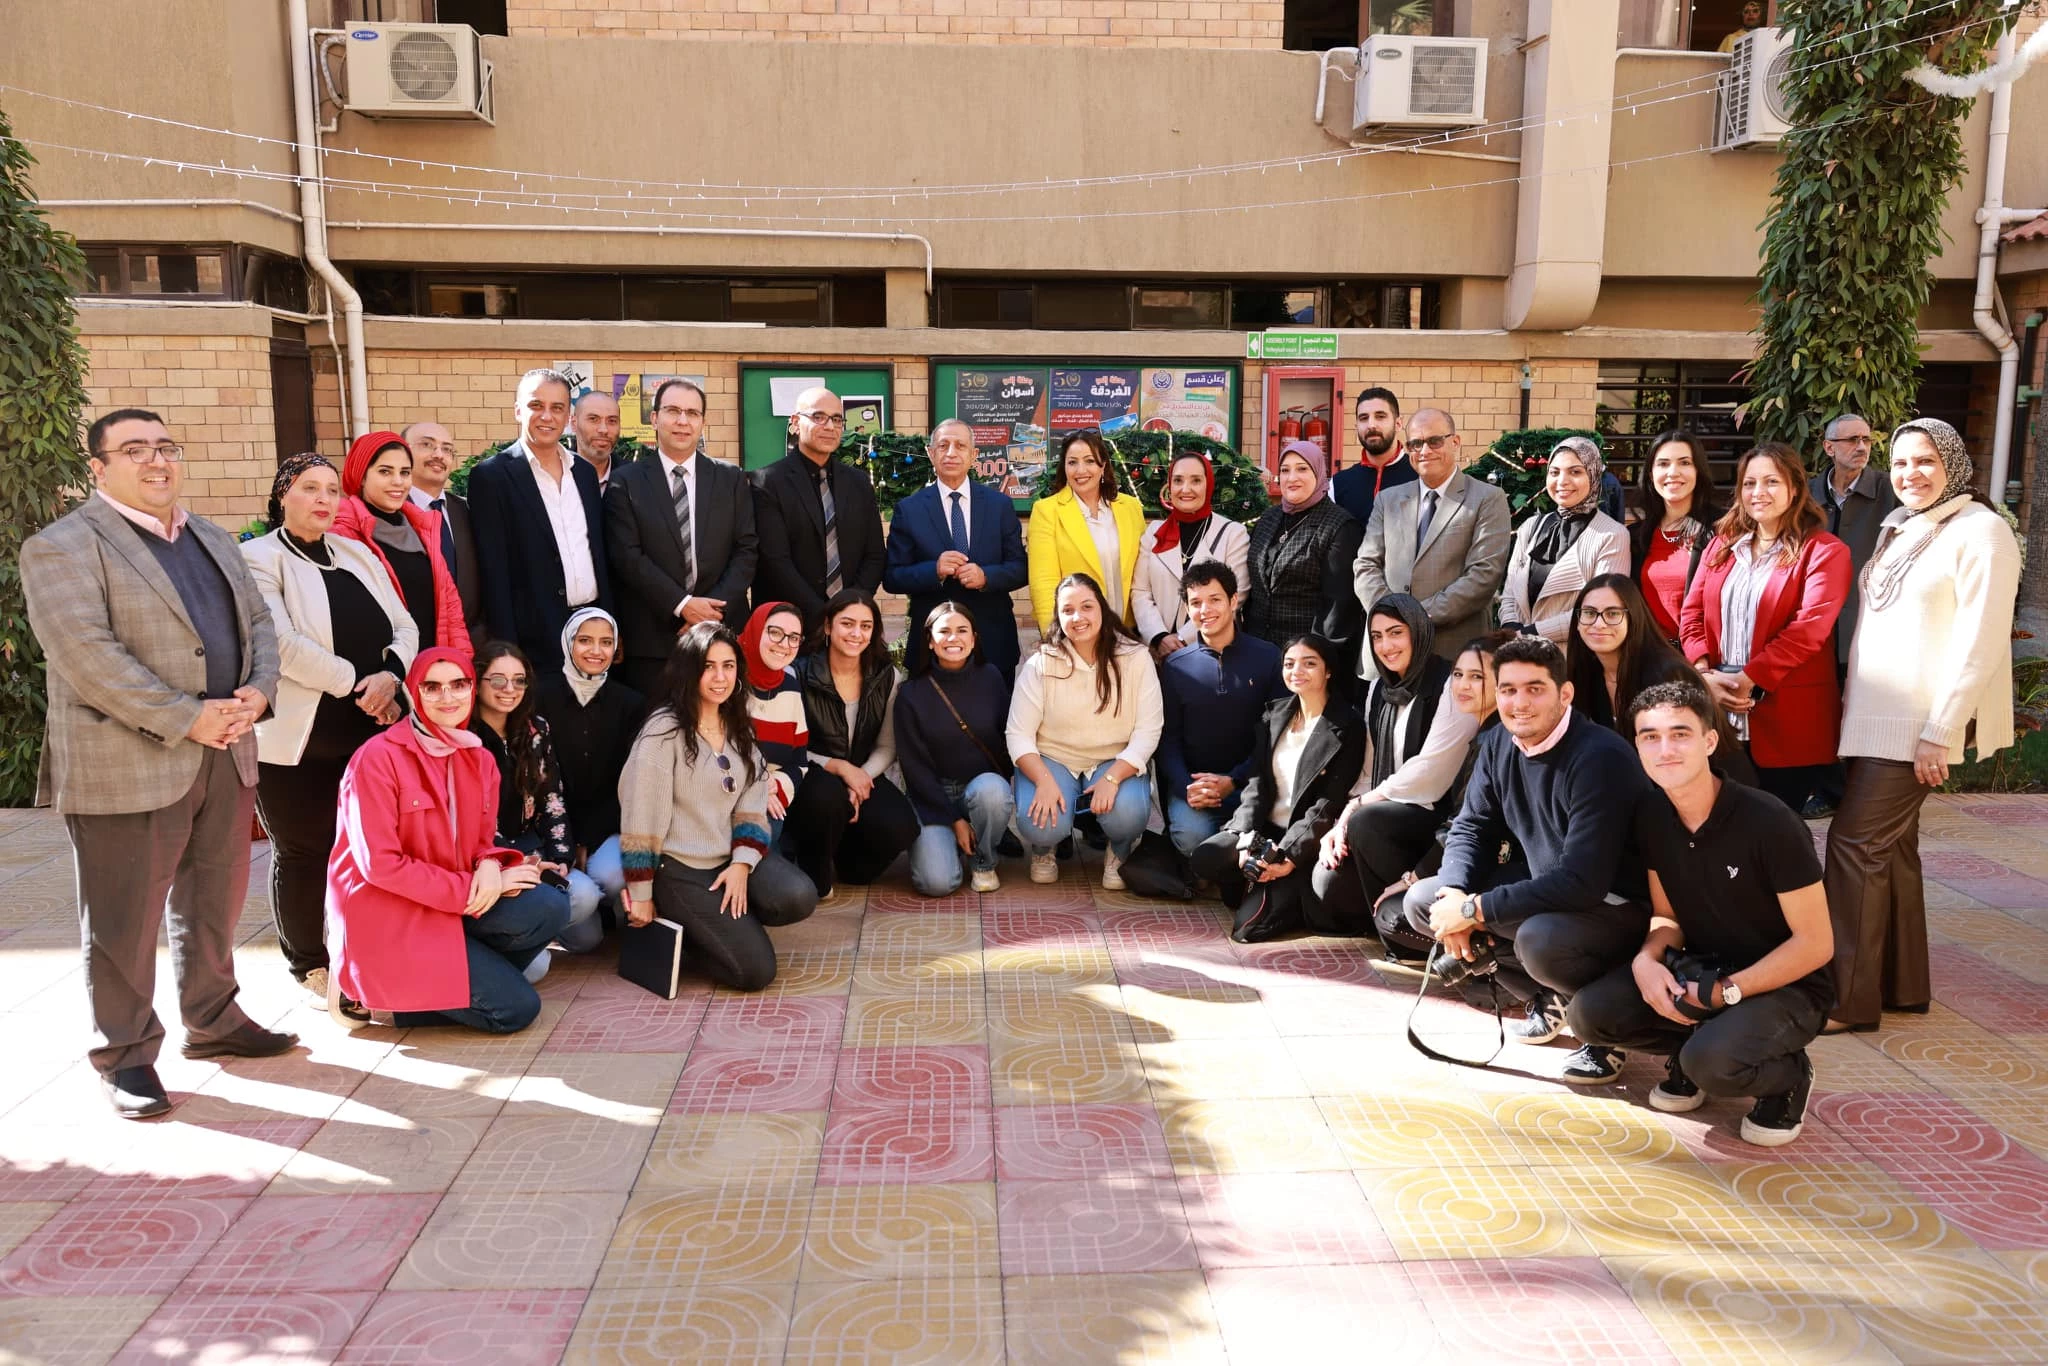 His Excellency Professor Dr., President of the Arab Academy for Science, Technology and Maritime Transport, opened the closing ceremony of activities and the exhibition of fine arts and handicrafts for students of the Faculties of Management, Technology, Language and Media in Miami on: 1/4/20247